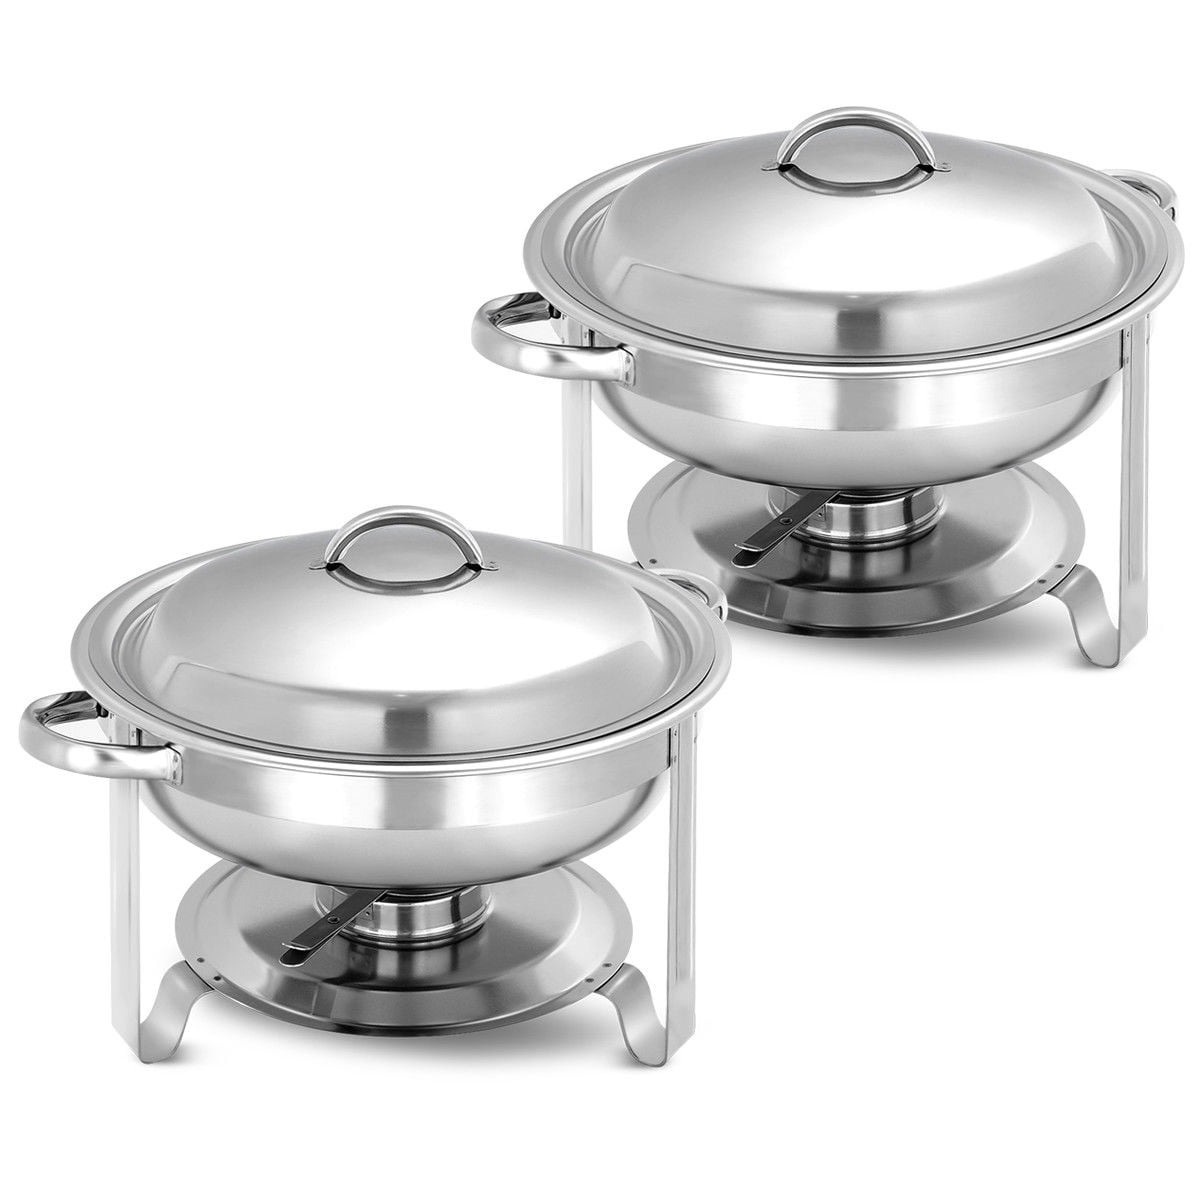 2 Pack Stainless Steel Round Chafing Dish Full Size Tray 5 Quart Buffet Chafing Dish Round Stainless Steel